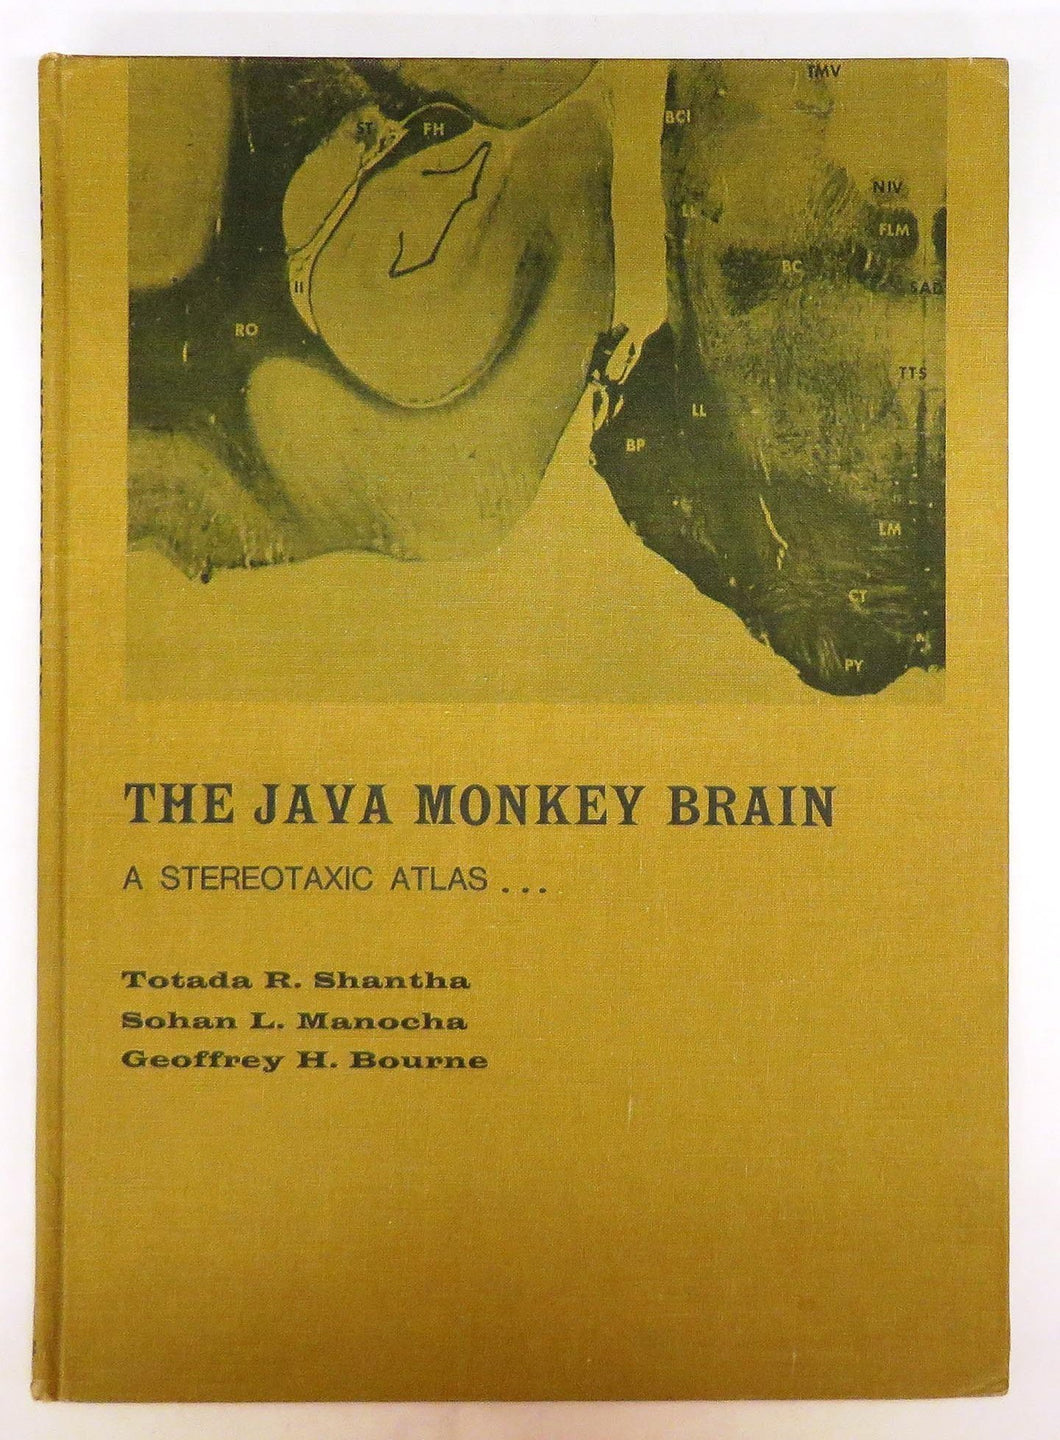 A Stereotaxic Atlas of the Java Monkey Brain